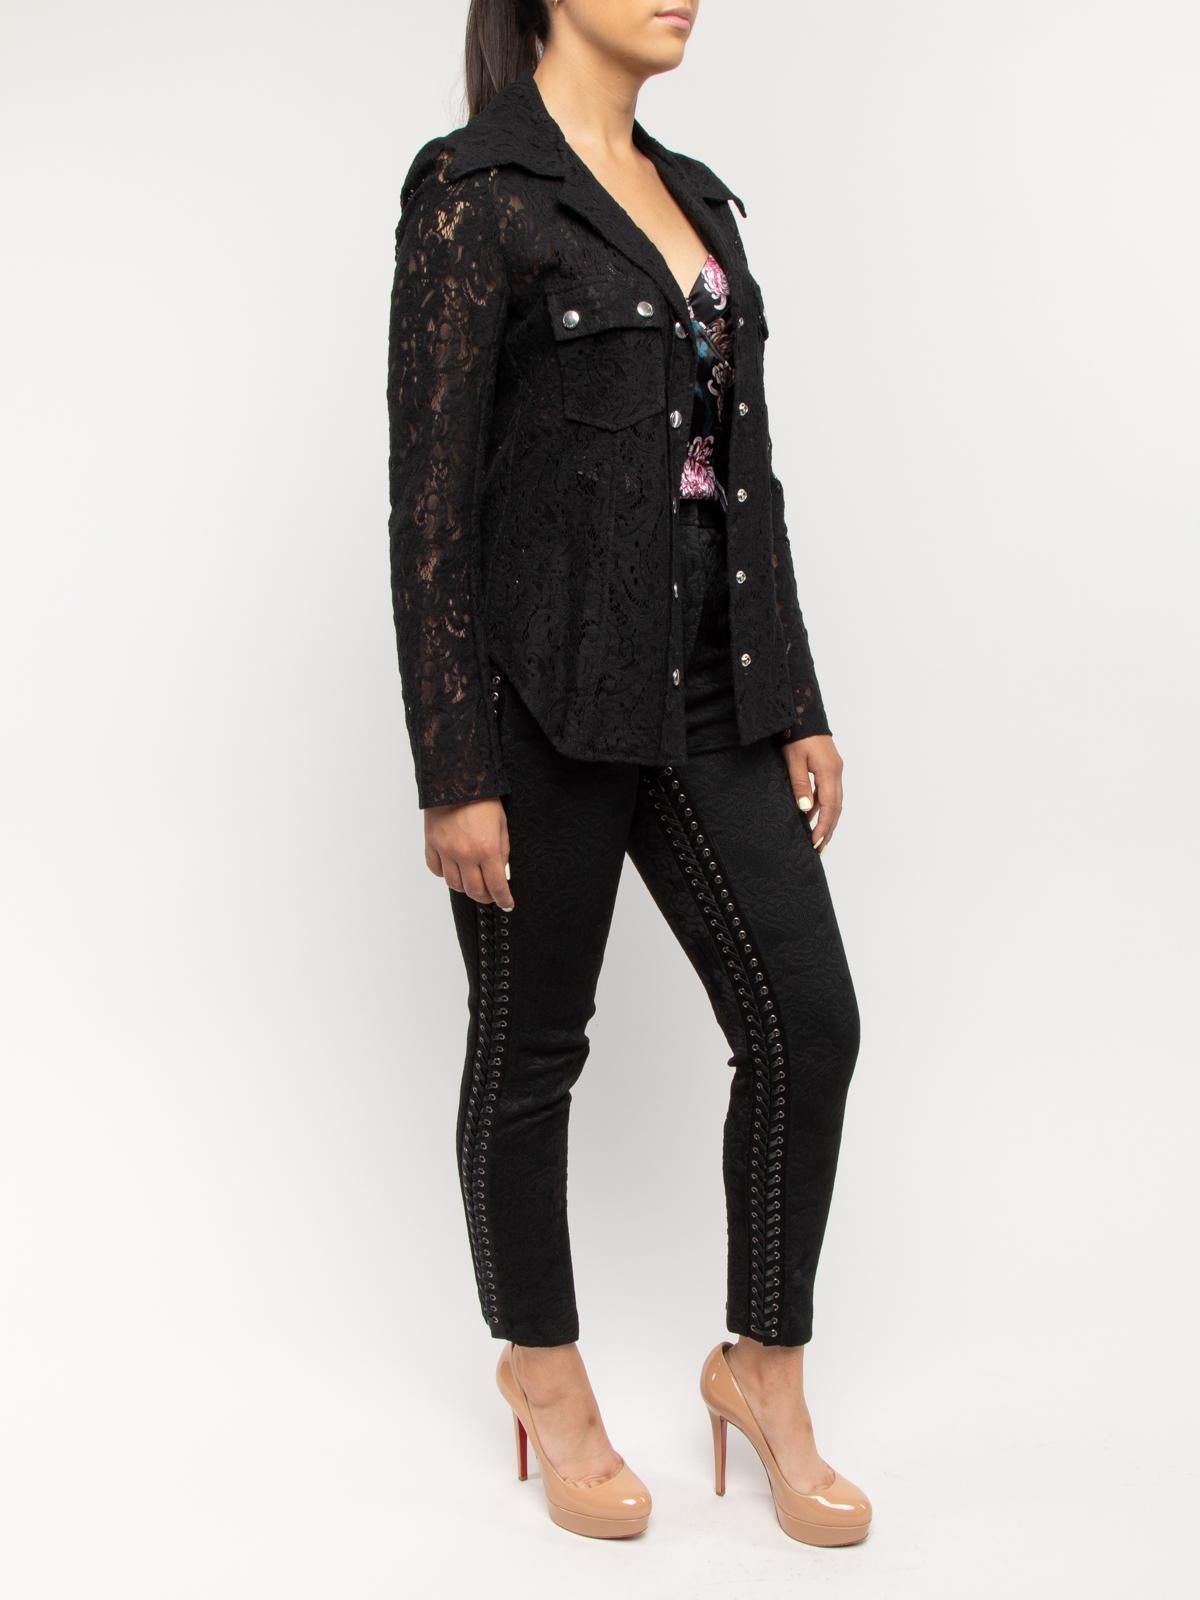 Black Pre-Loved Chloé Women's Sheer Lace Over Jacket